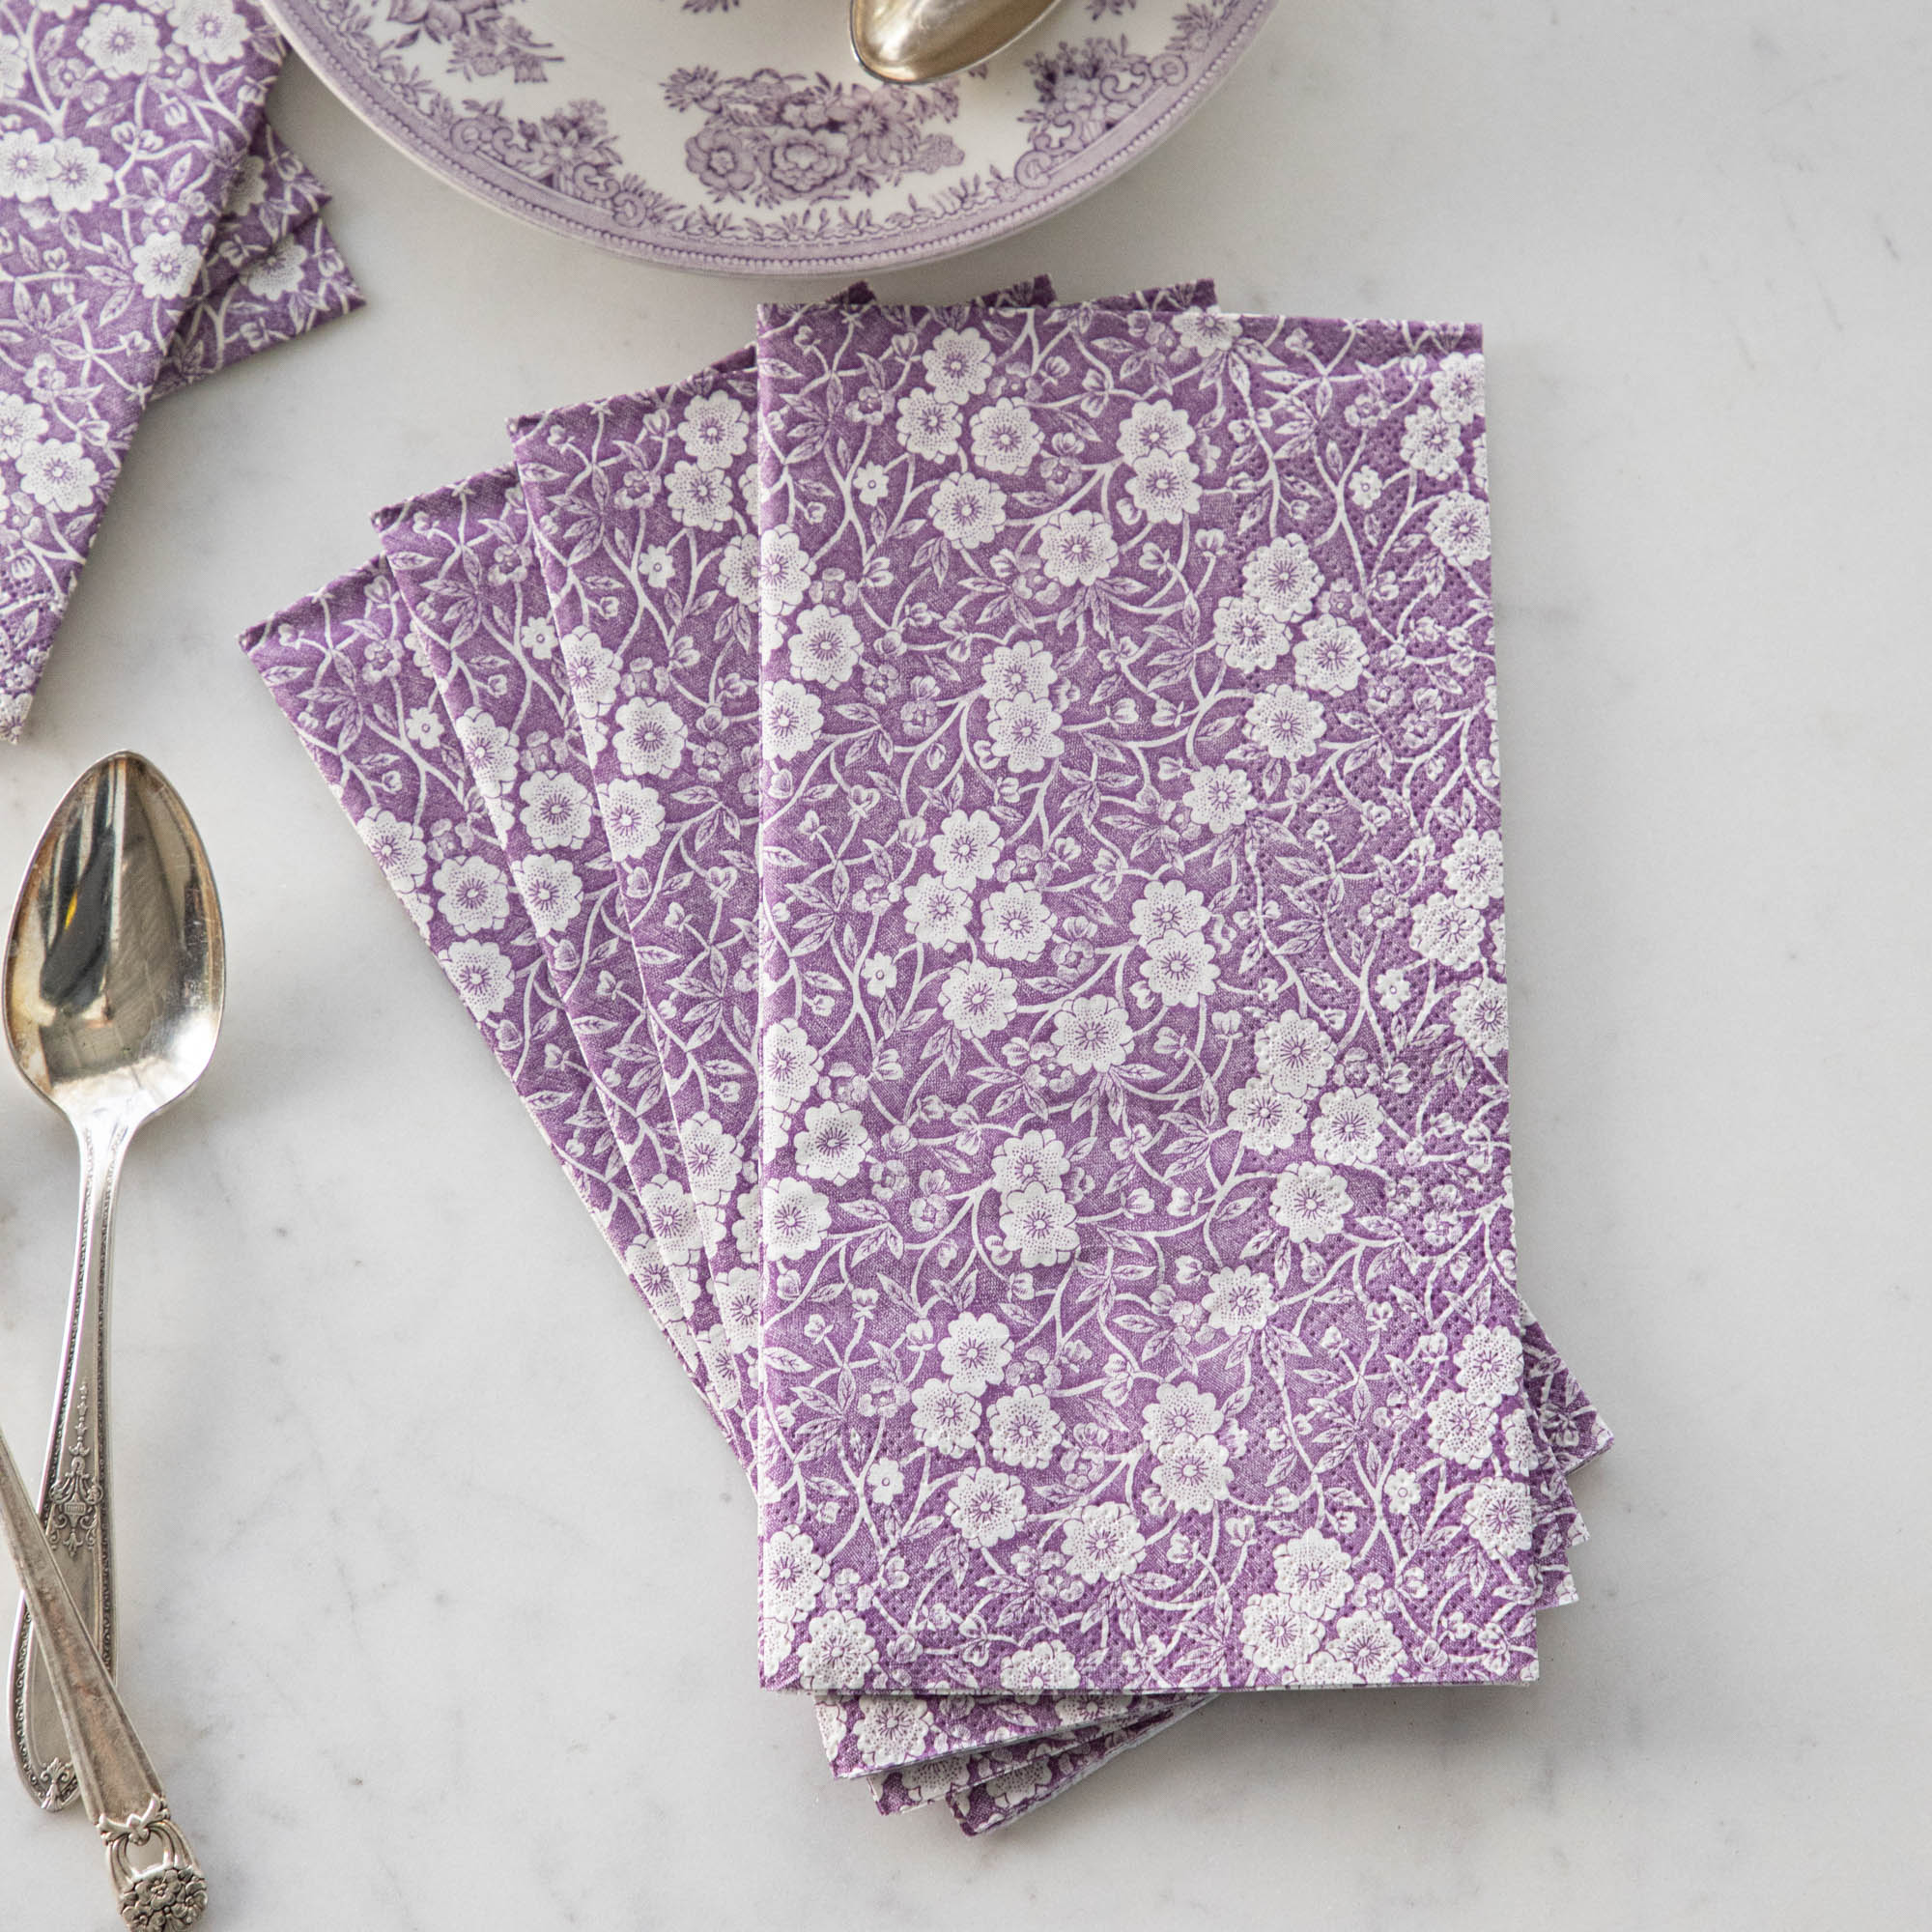 Exquisitely decorated Lilac Calico Napkins by Hester &amp; Cook on a marble table.